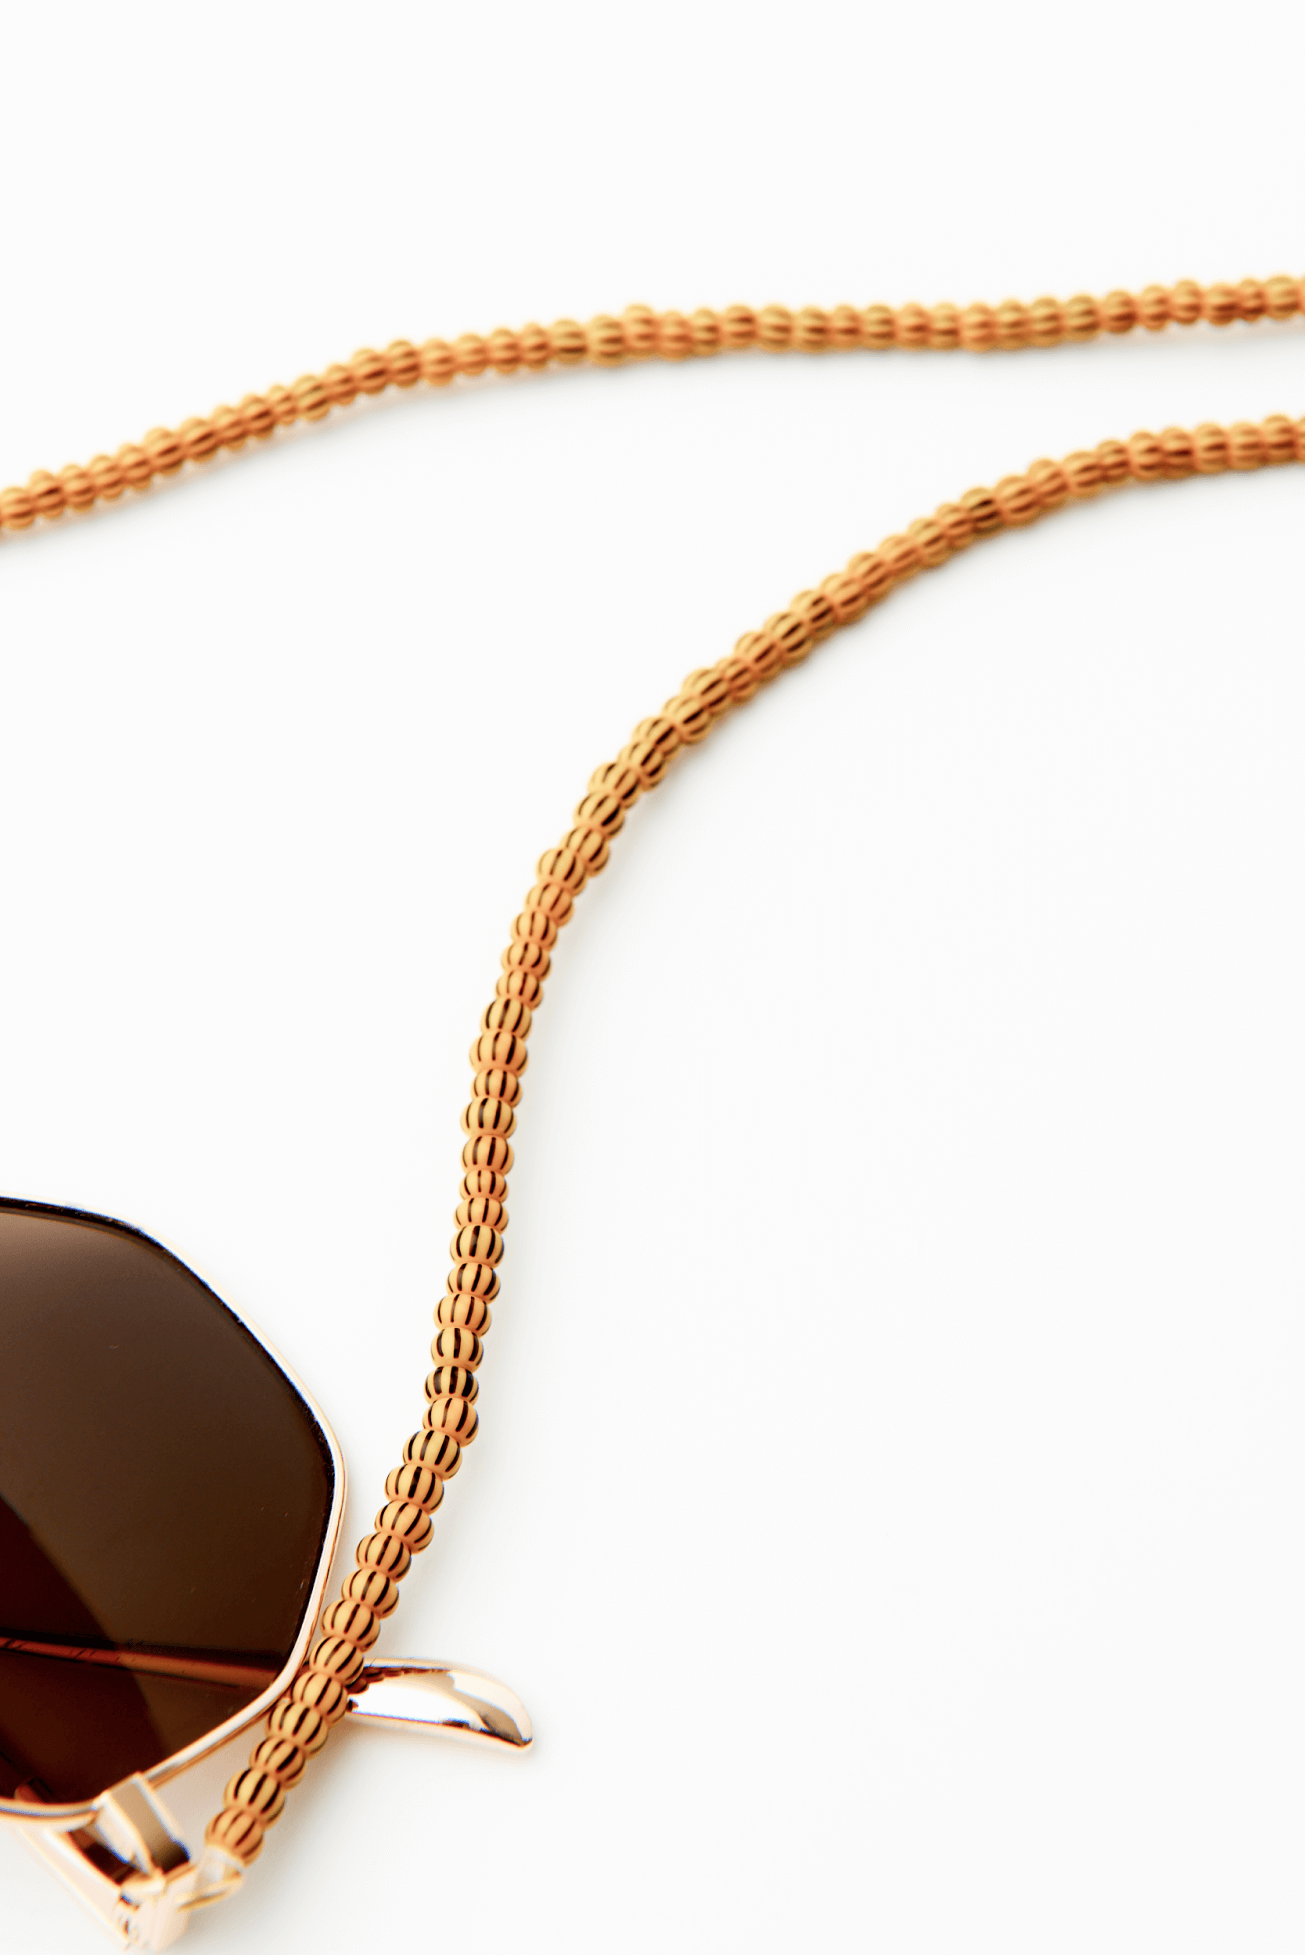 Shop The Arthur Sunglasses Cord by Soluna Collections on Arrai. Discover stylish, affordable clothing, jewelry, handbags and unique handmade pieces from top Kenyan & African fashion brands prioritising sustainability and quality craftsmanship.